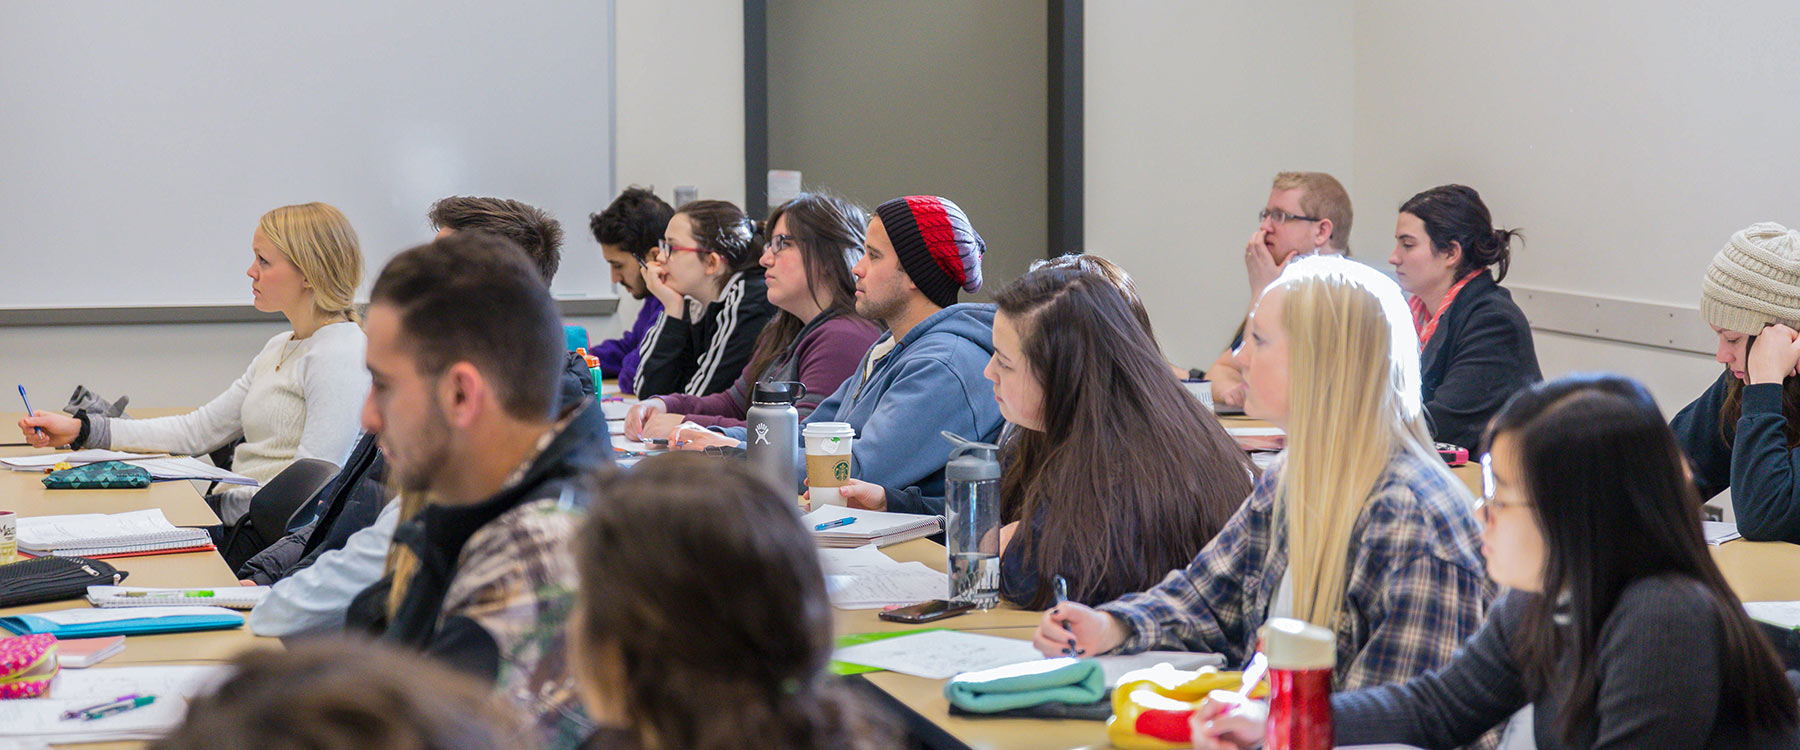 Students sit in rows in a full classroom listening and taking notes during a lecture.